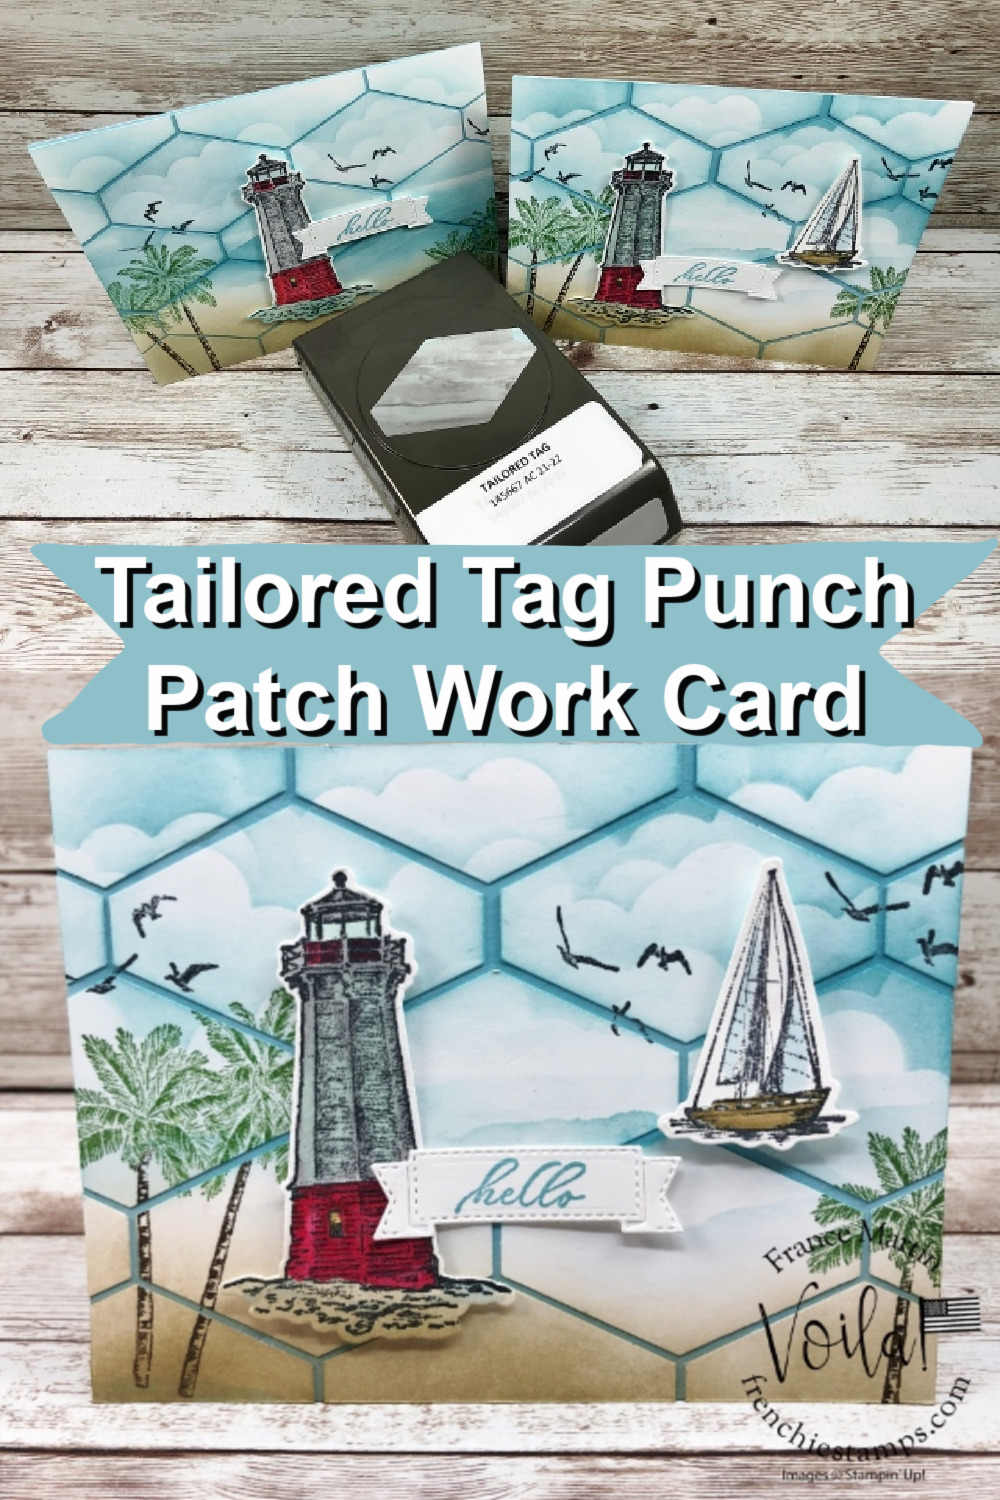 Tailored Tag Punch Ocean Scenery Patchwork Greeting Card